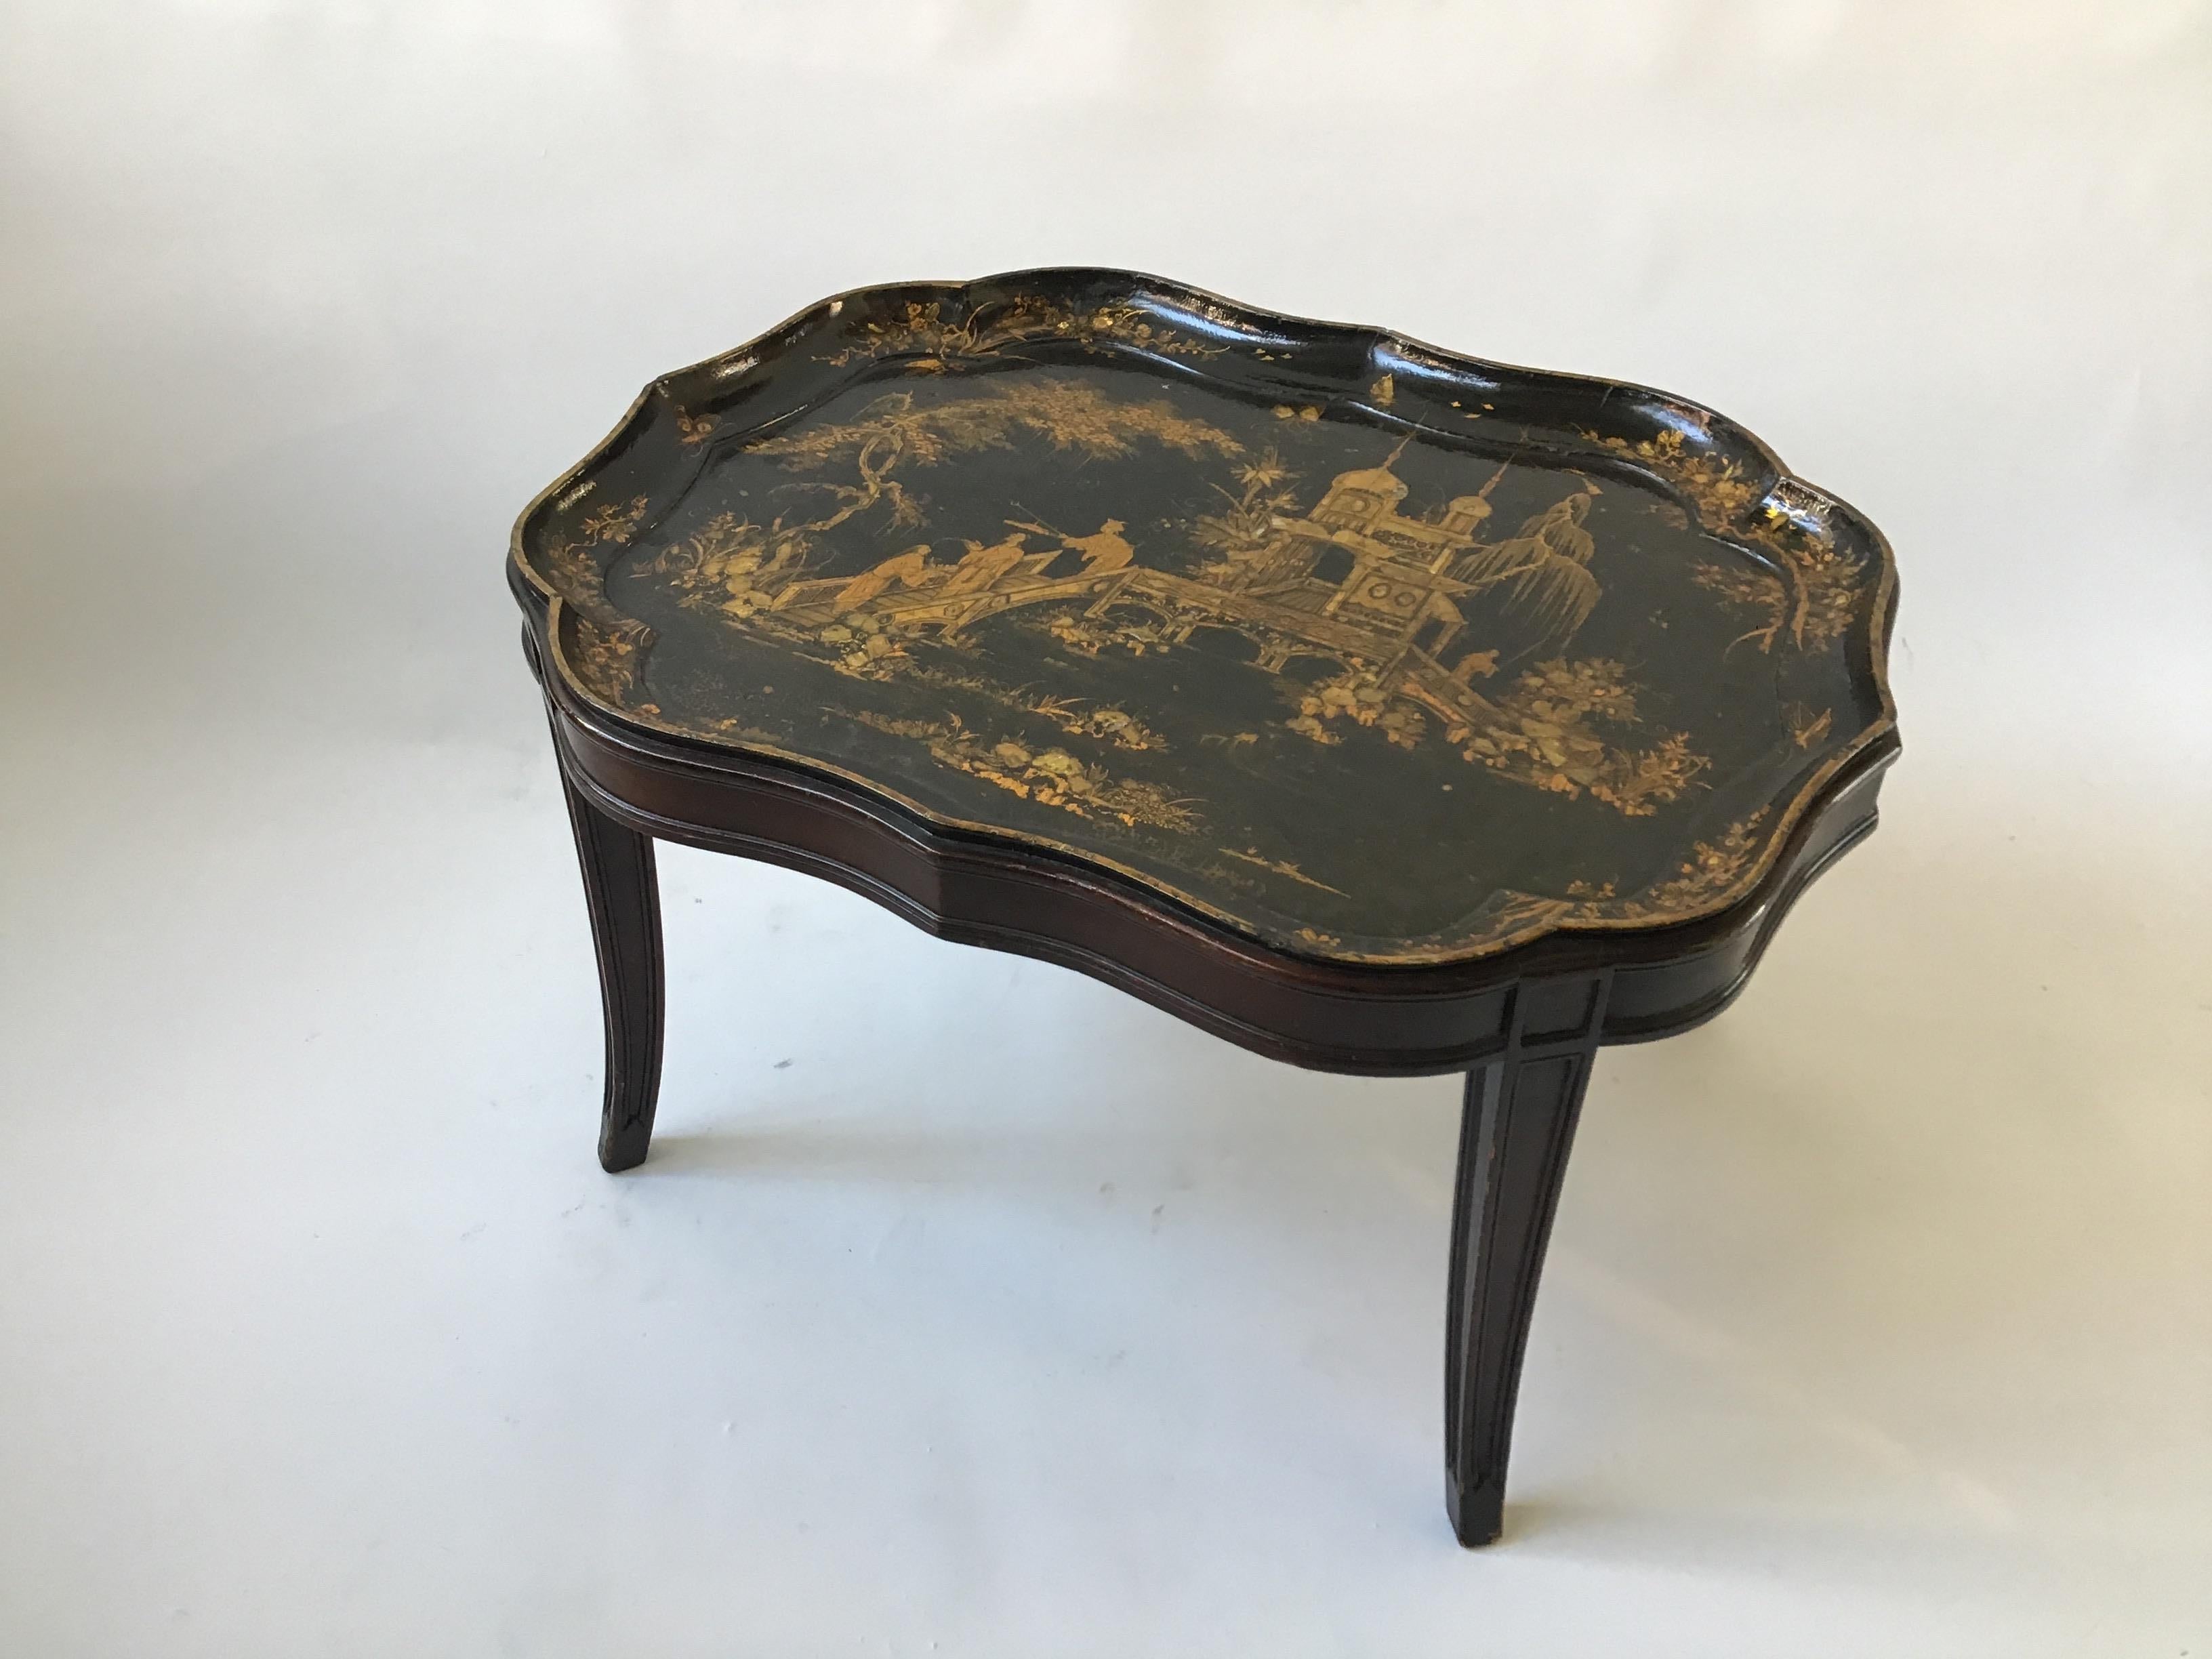 1880s English Chinoiserie Paper Mache Tray Table 3